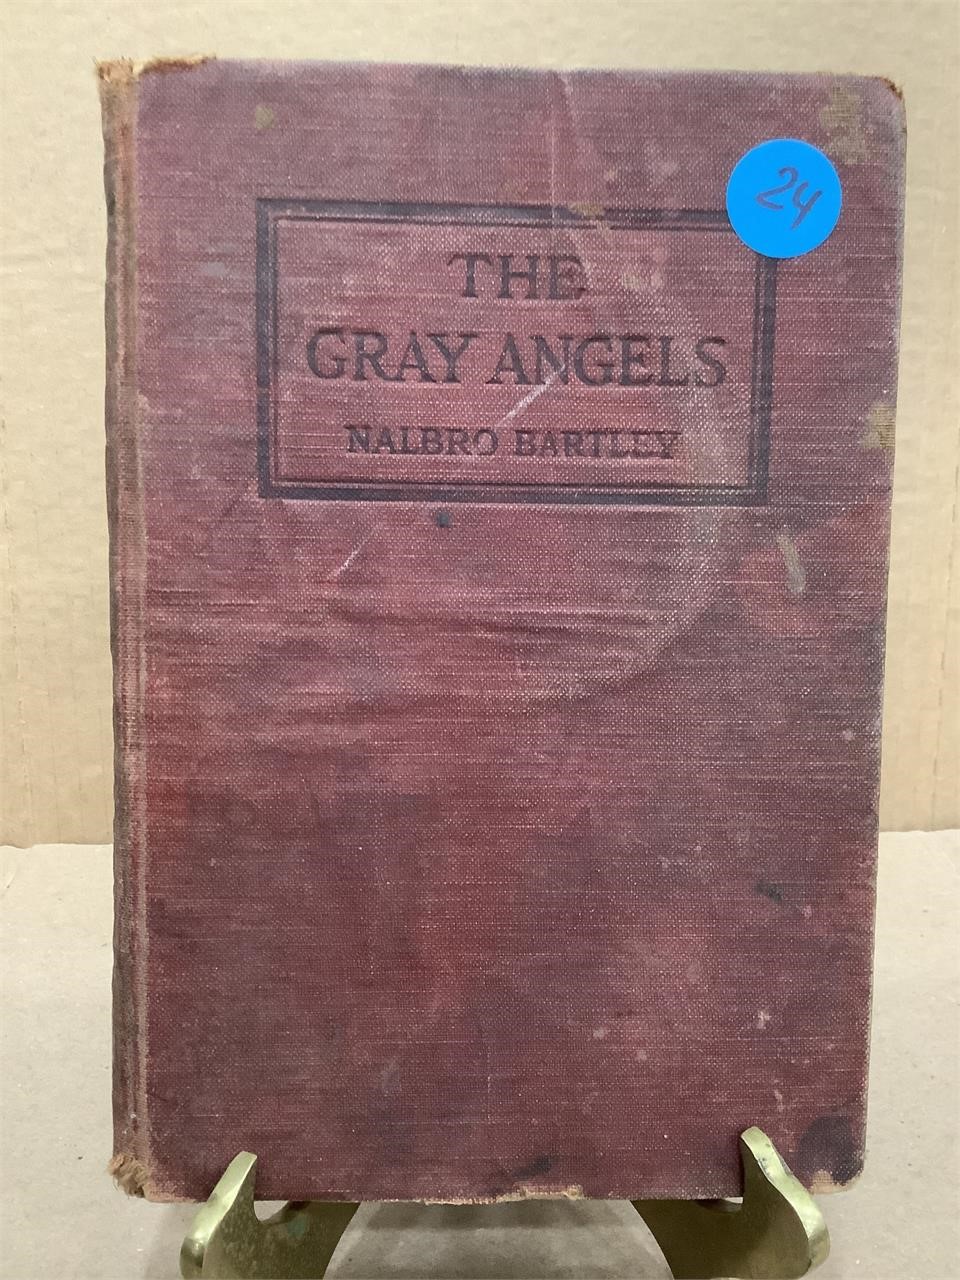 The Gray Angels by Nalbro Bartley